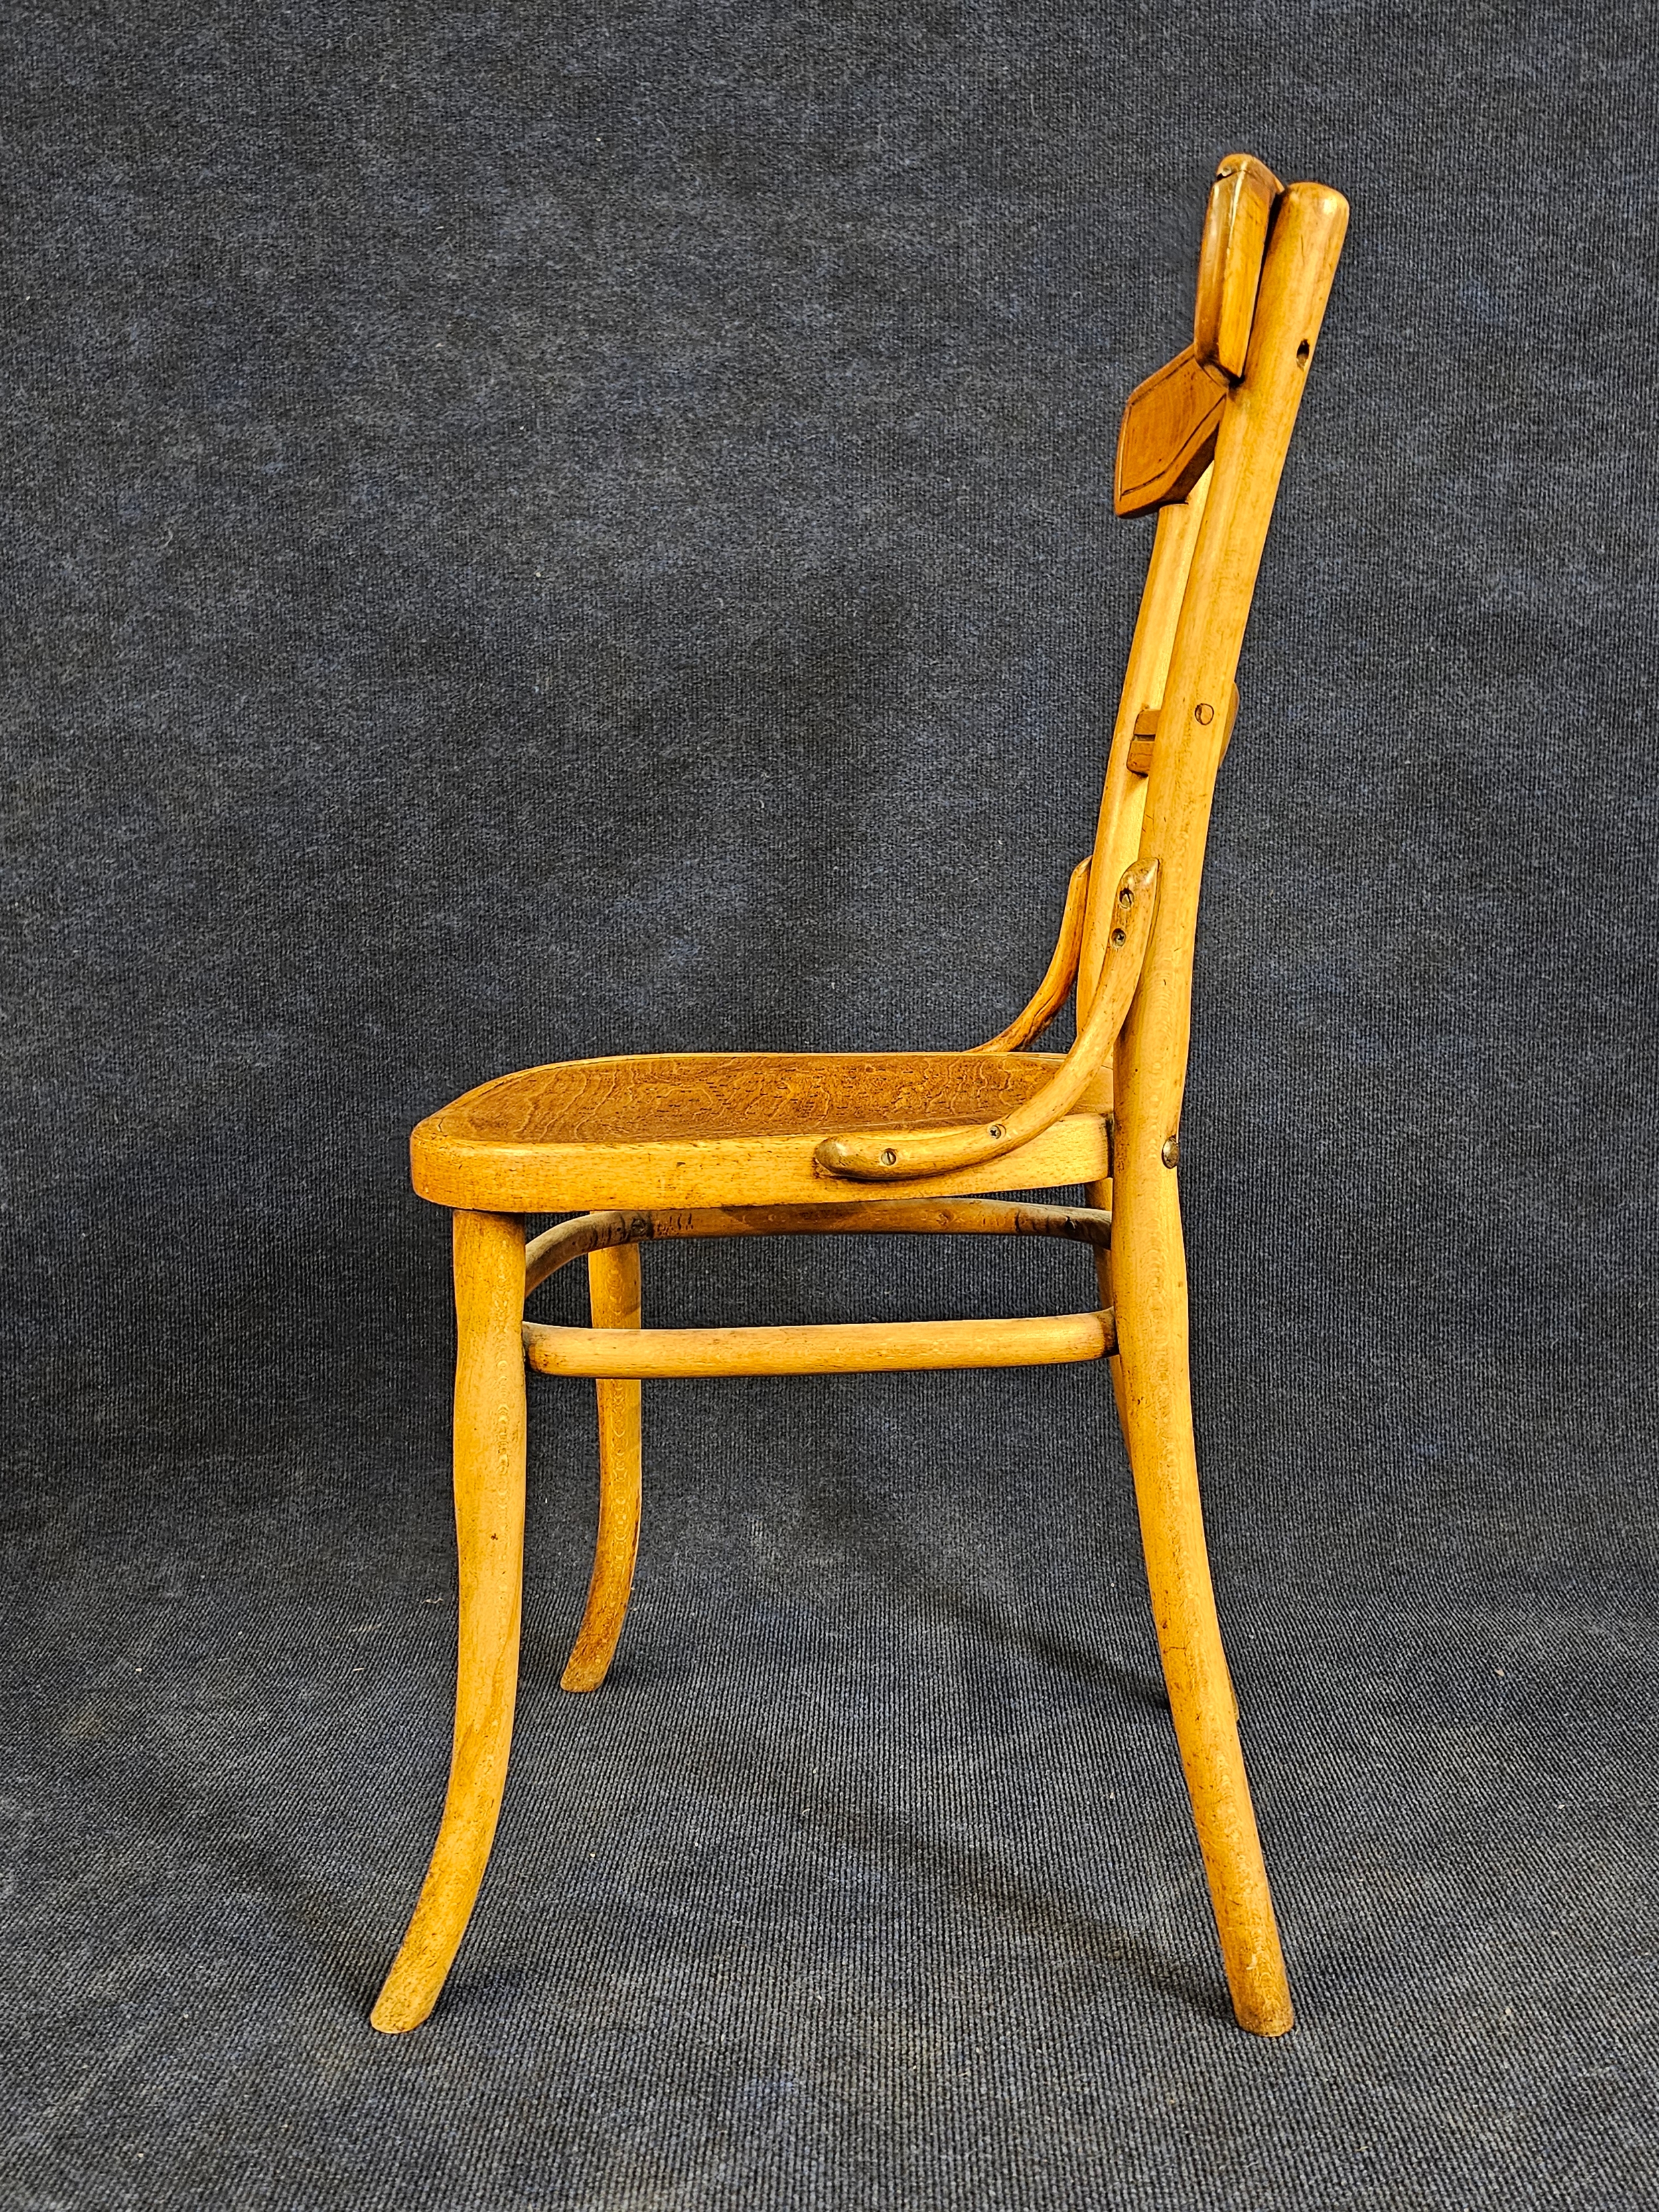 A 1920's bentwood chair - Image 6 of 8